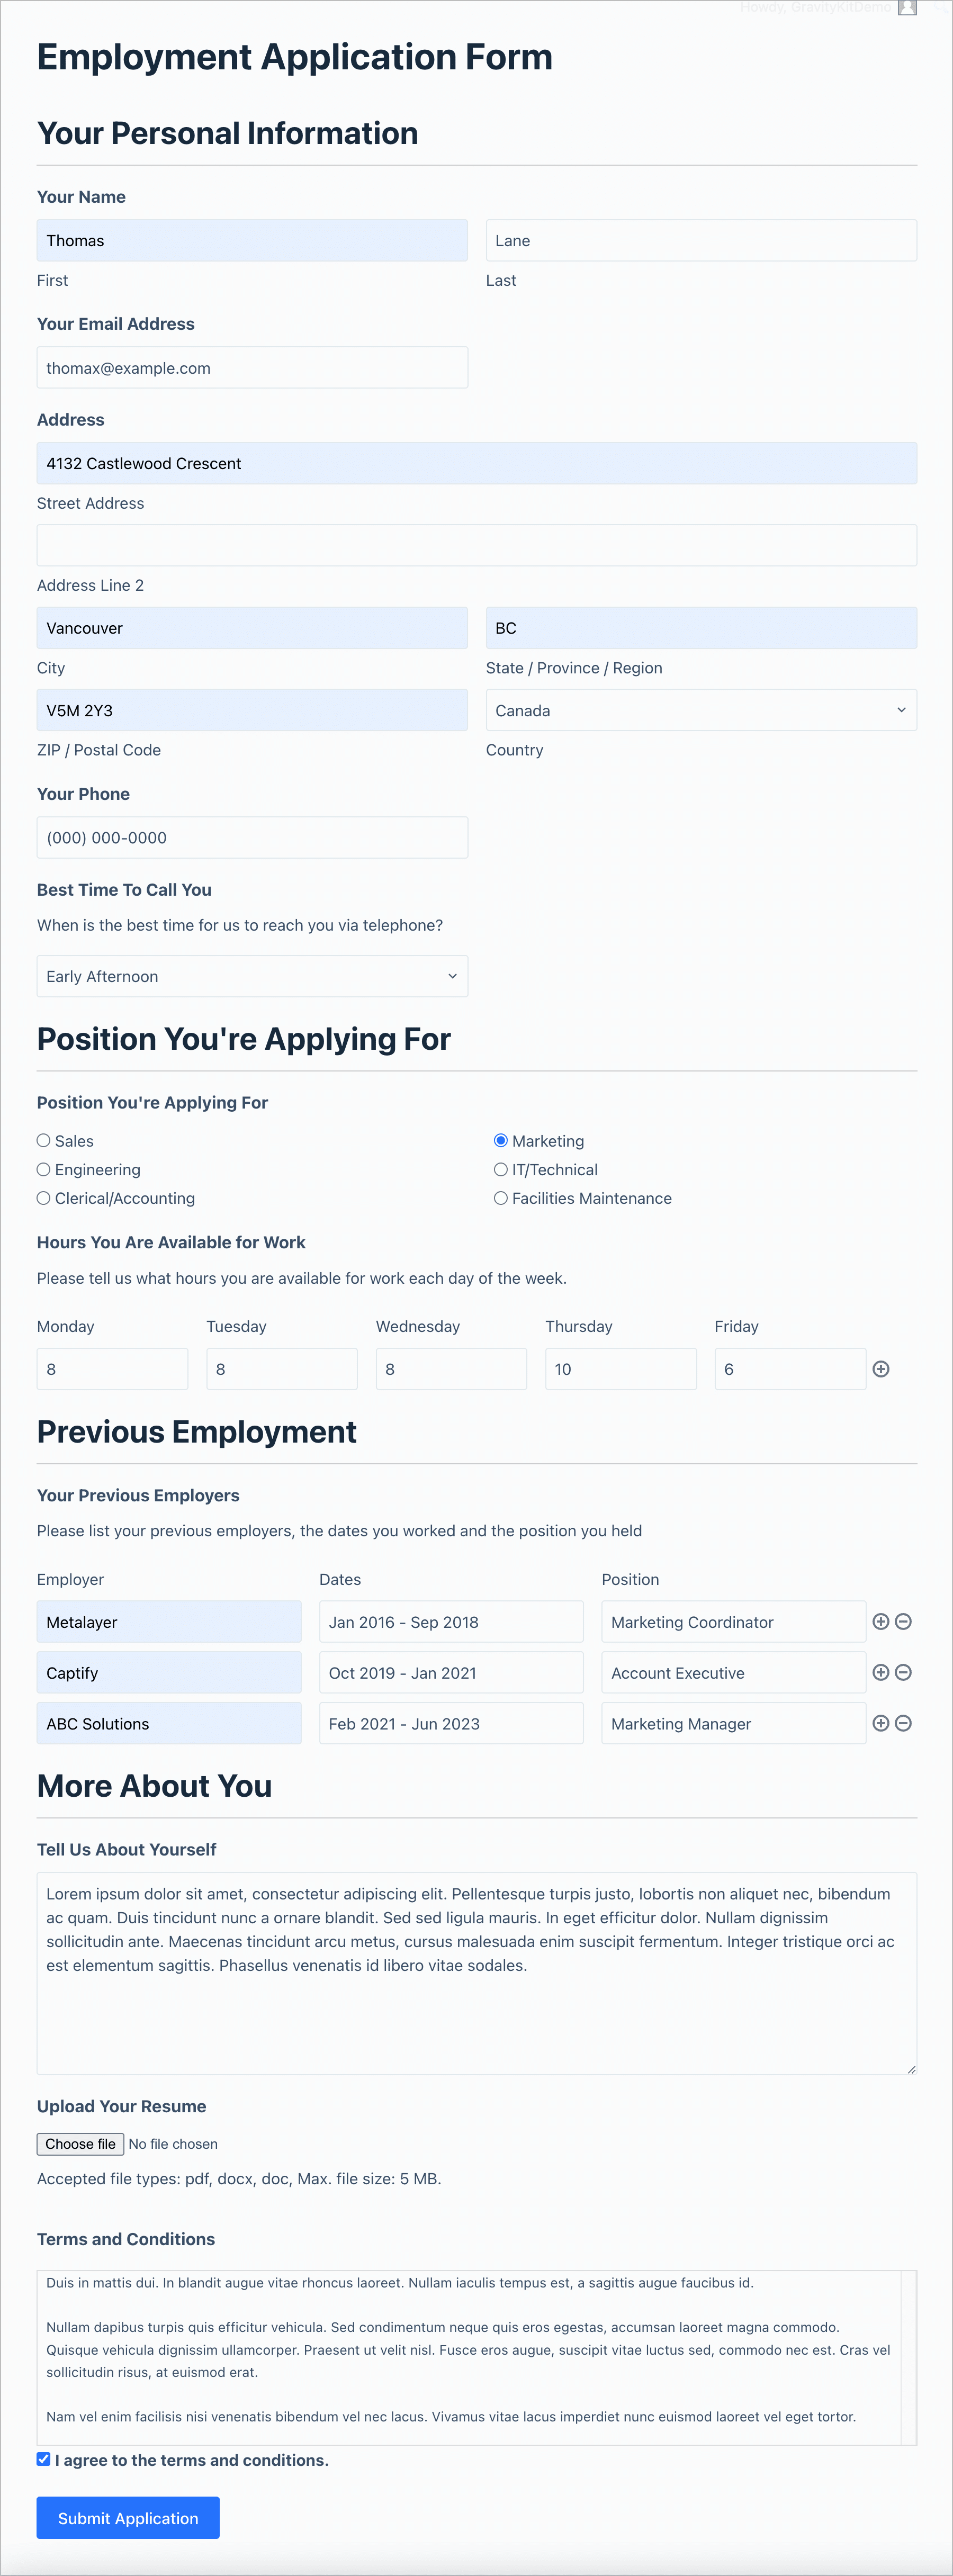 A job application form built using Gravity Forms